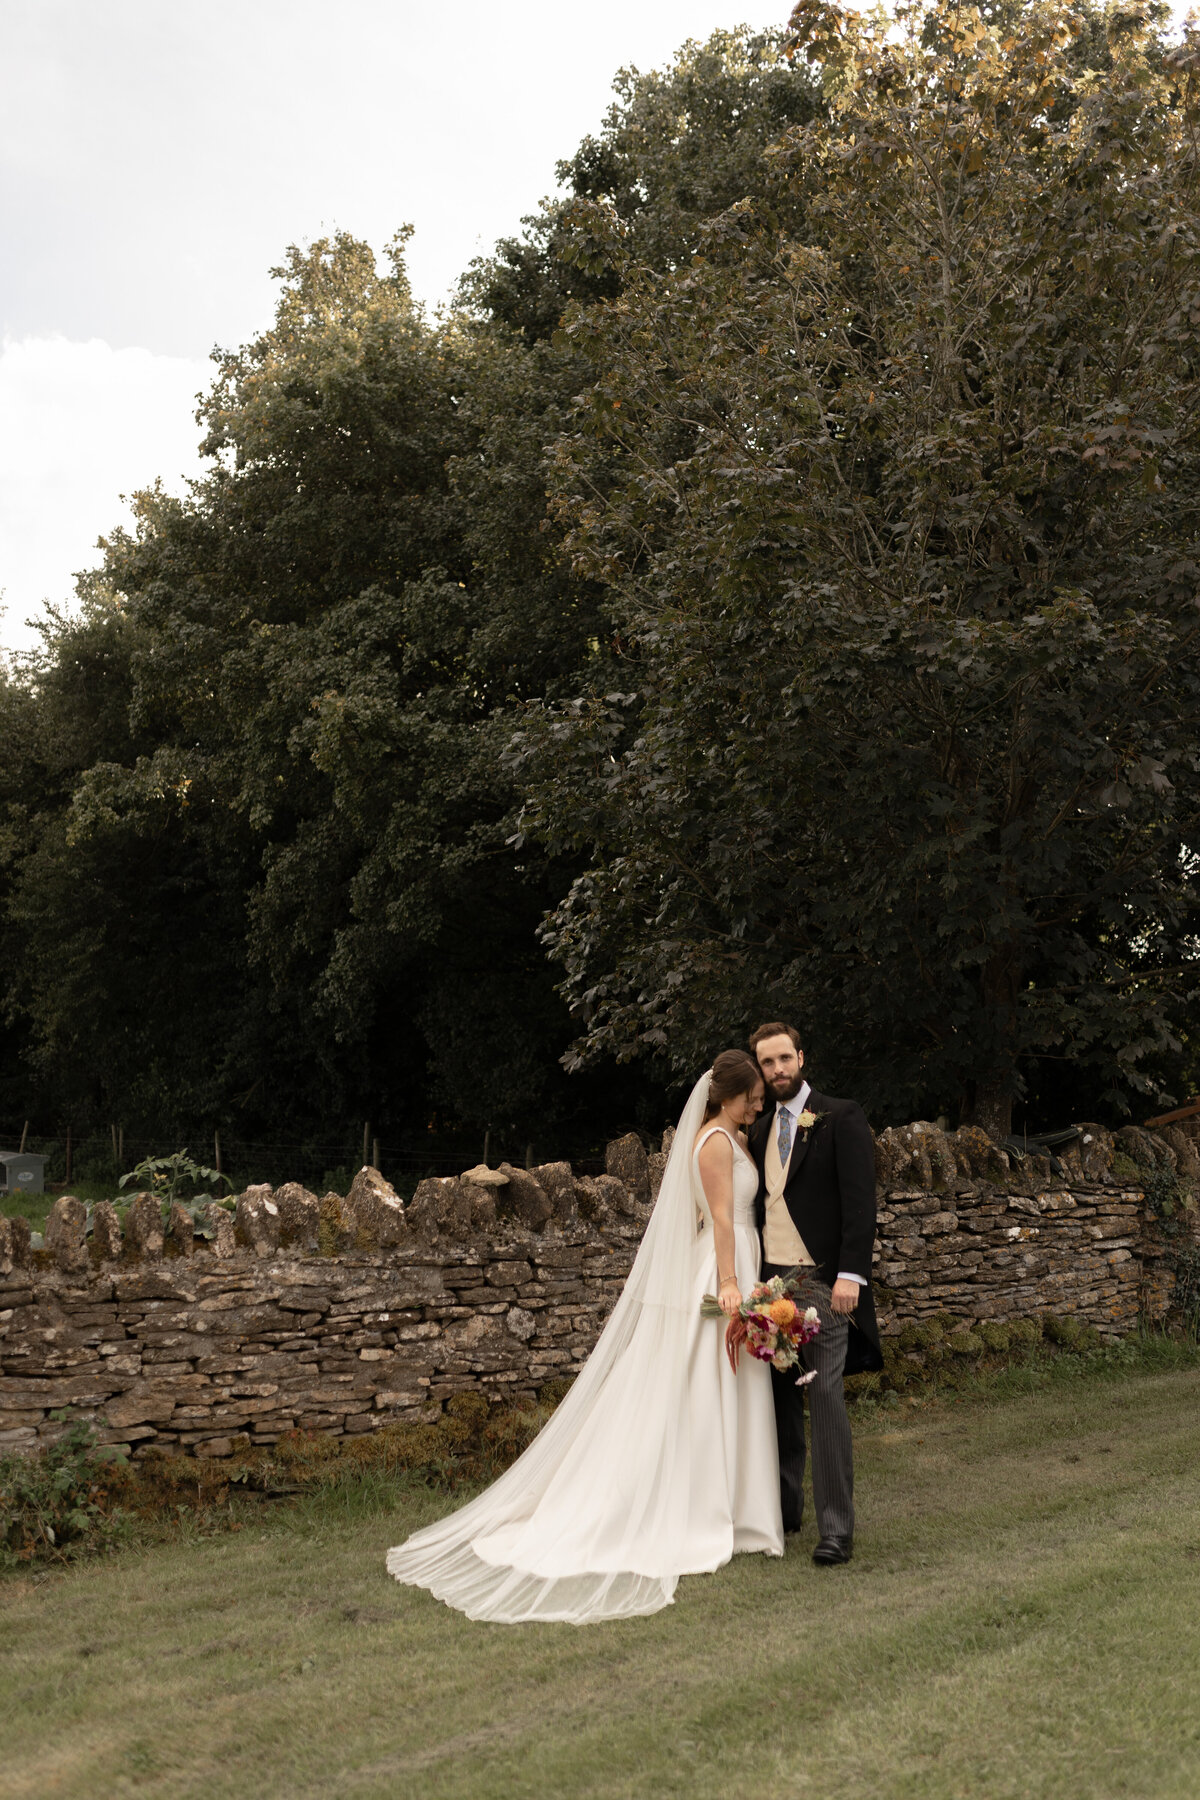 Editorial wedding photography in Somerset